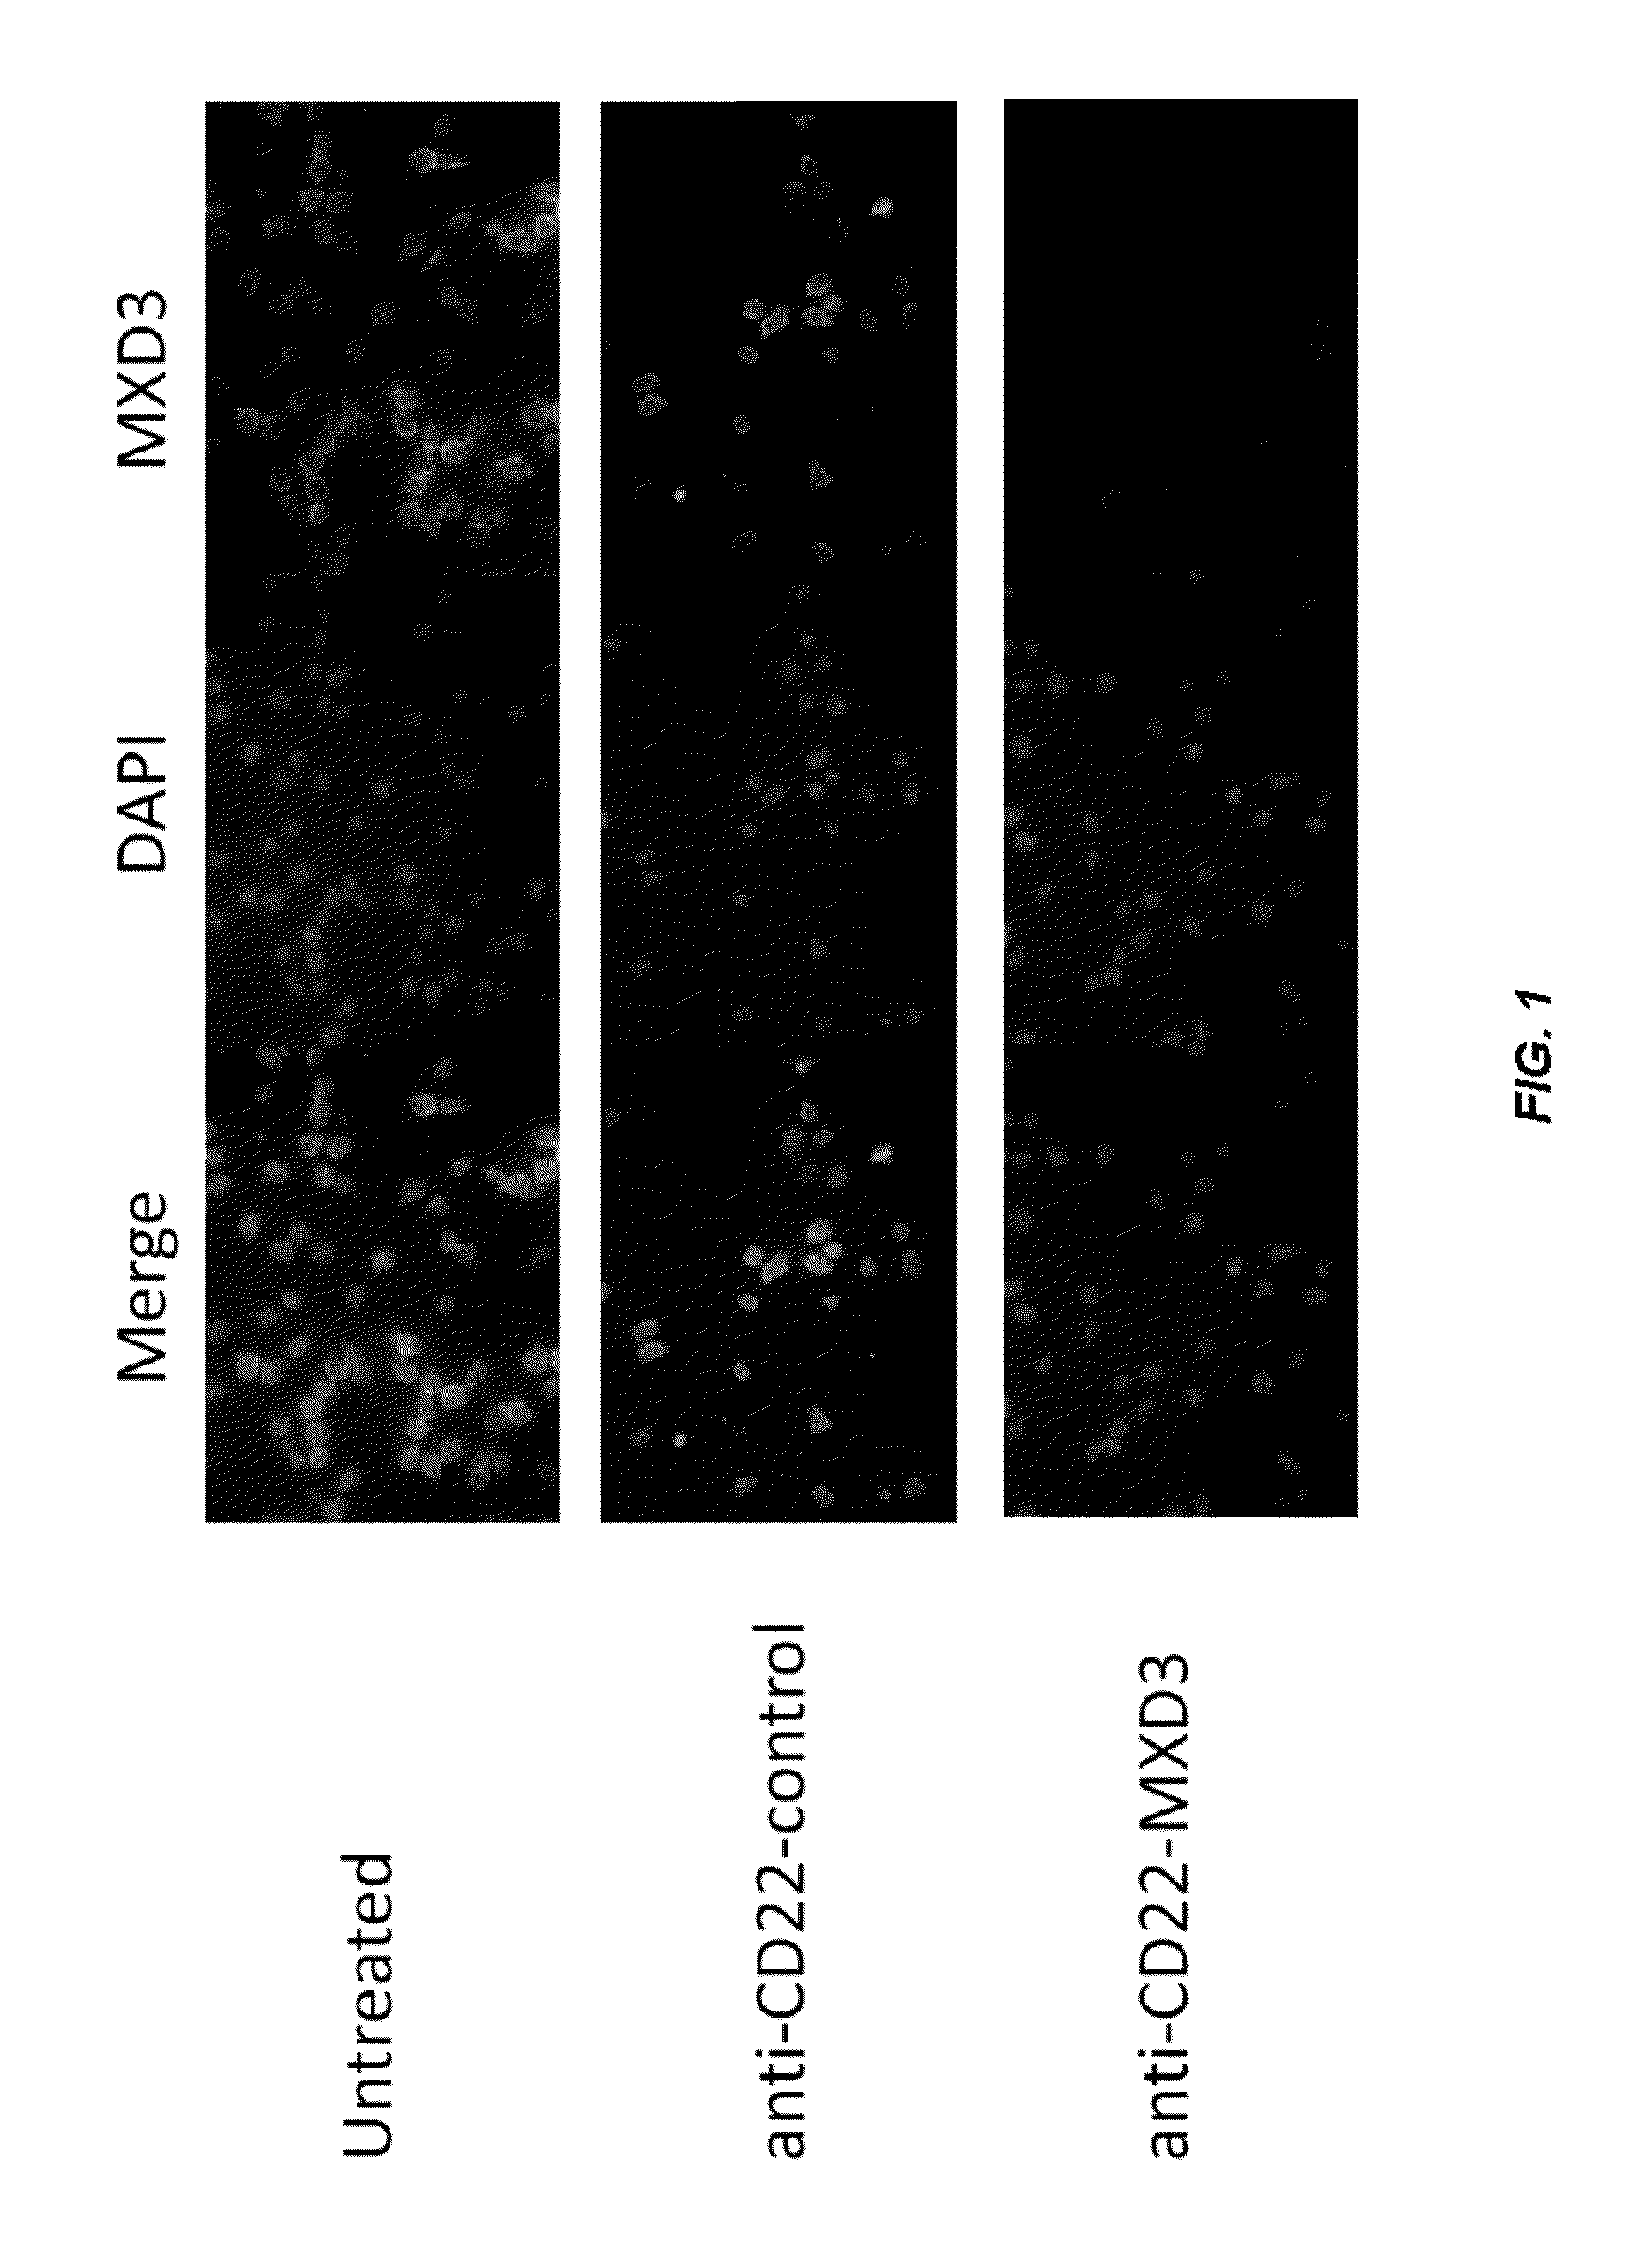 Antisense compounds and uses thereof